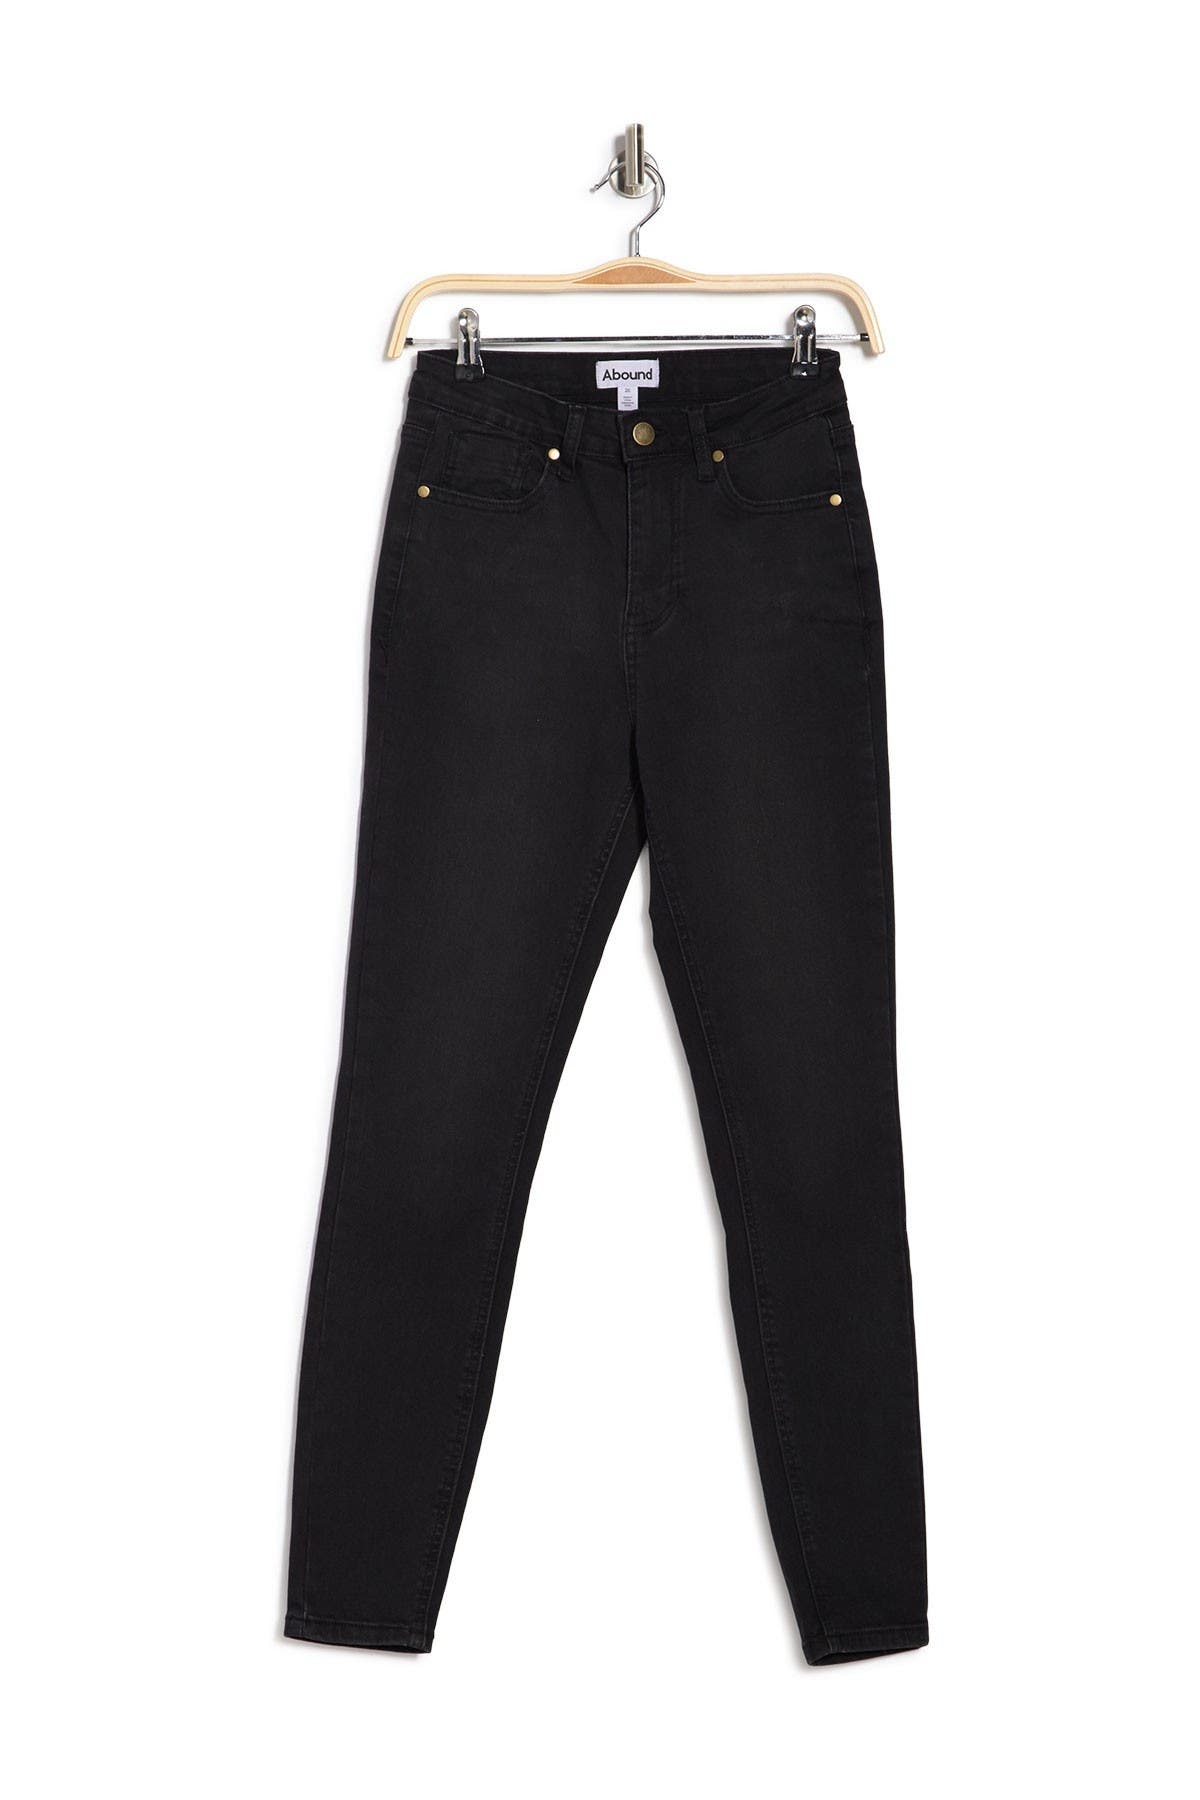 Abound High Rise Skinny Jean In Black Washed